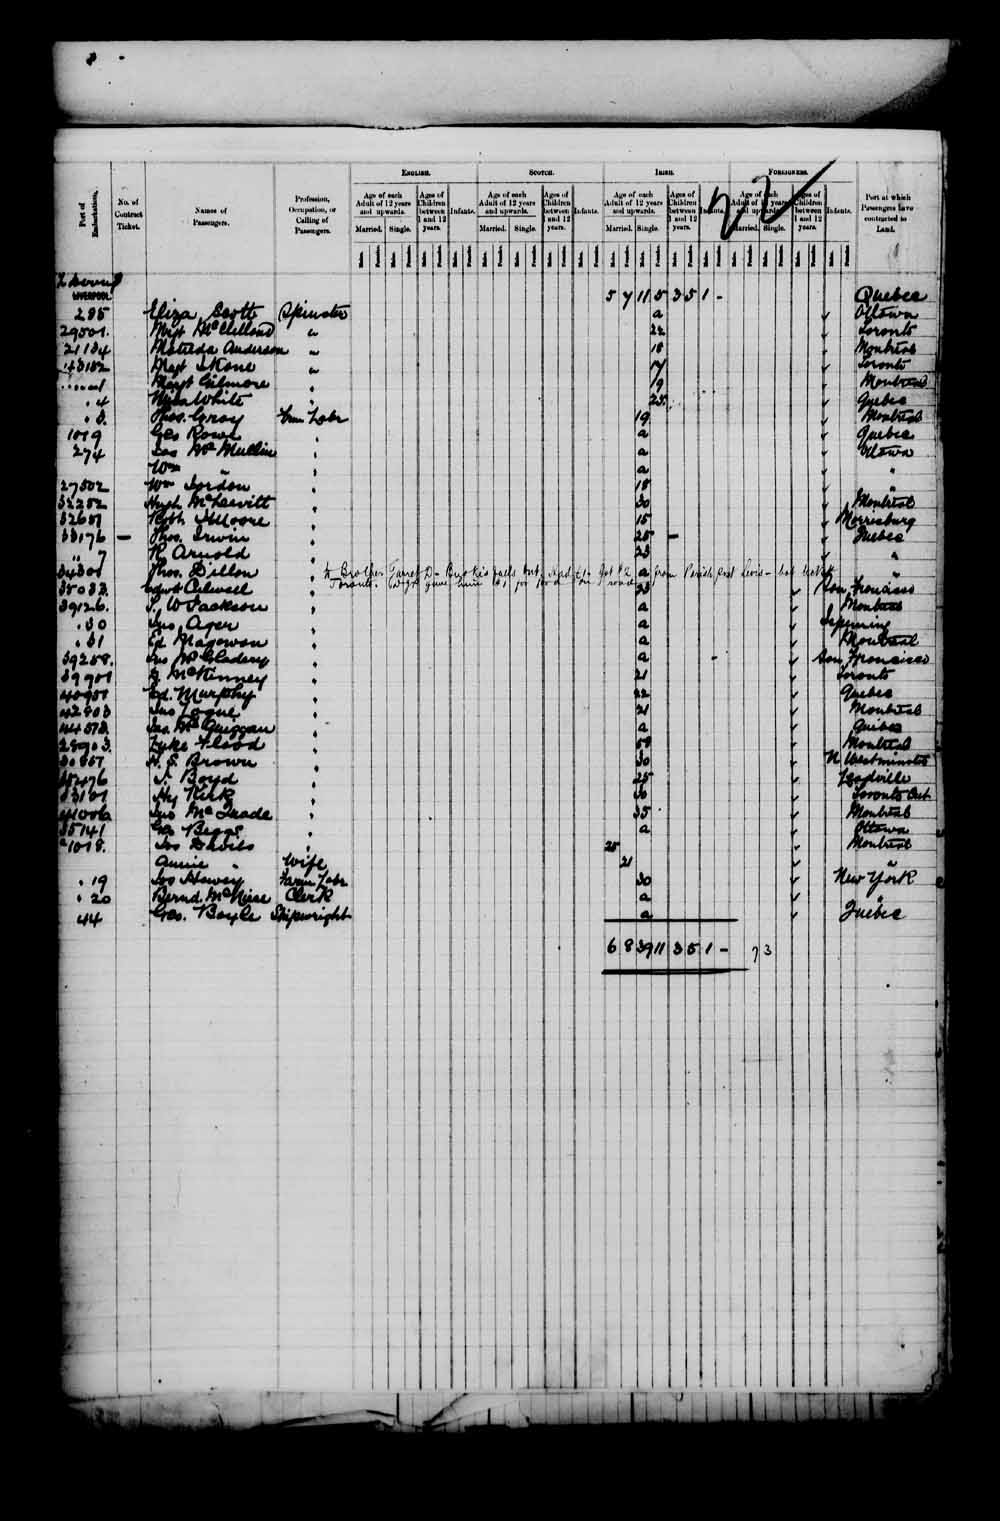 Digitized page of Passenger Lists for Image No.: e003549682